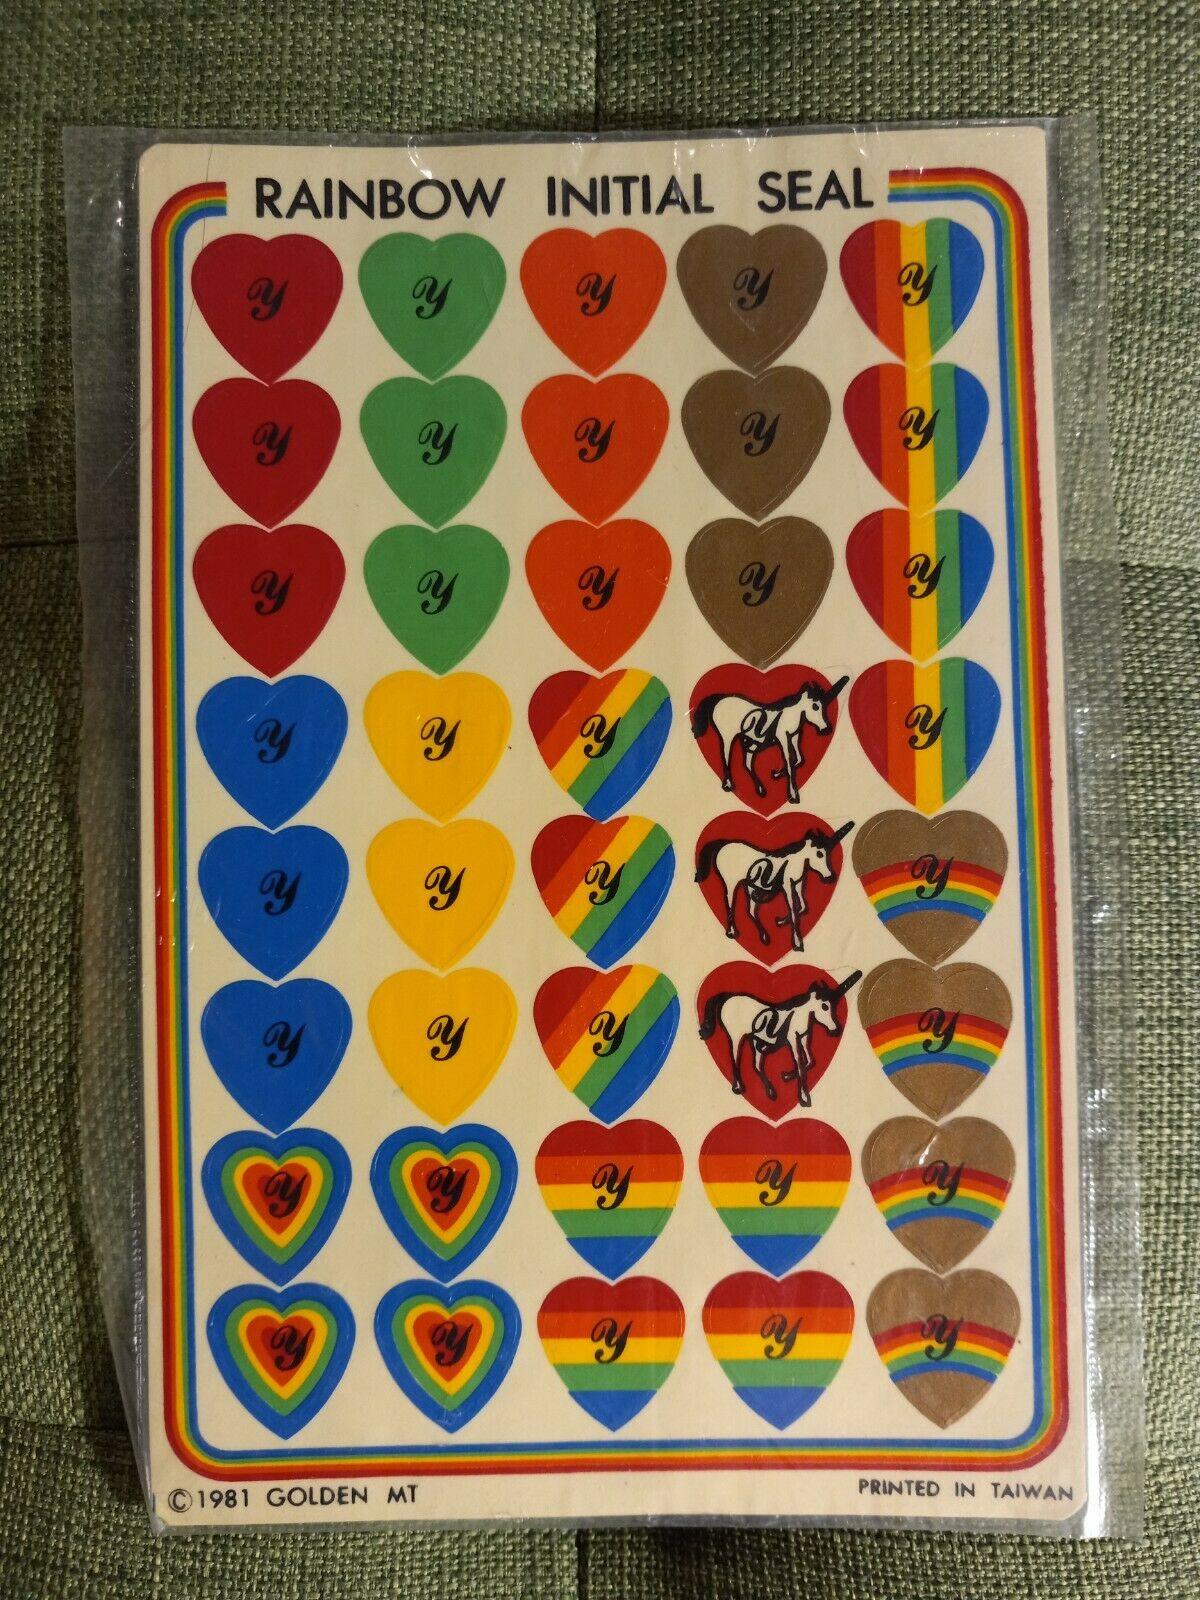 Vintage 1981 Golden Mt Rainbow Initial Seal Stickers, One Unopened Sheet "y"